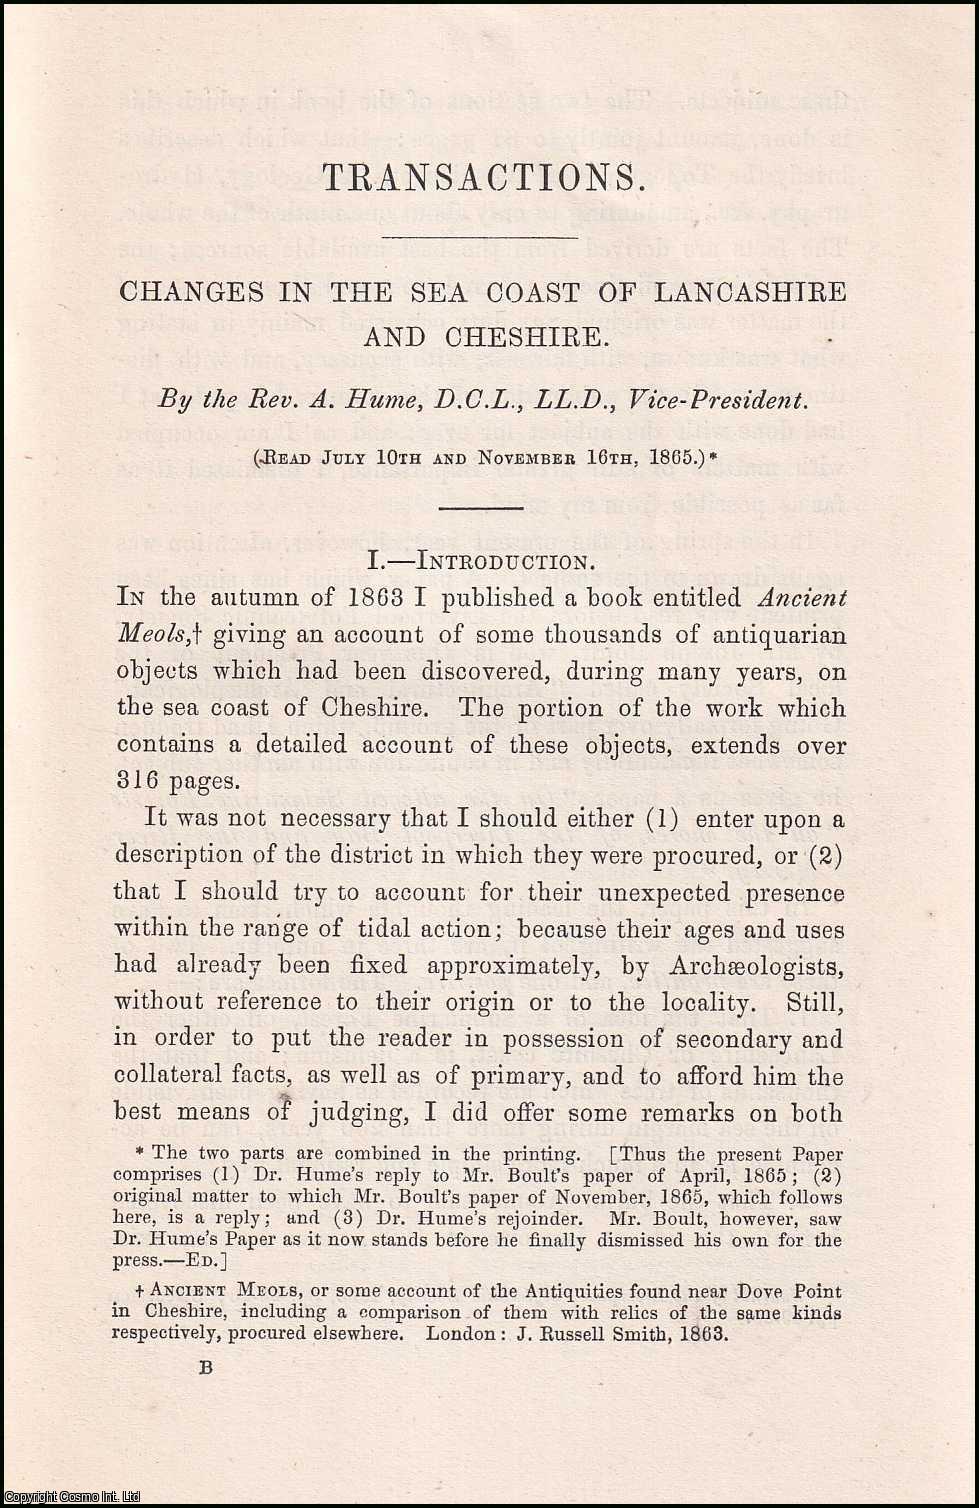 A. Hume - Changes in The Sea Coast of Lancashire and Cheshire. A rare original article from the Transactions of The Historic Society of Lancashire and Cheshire, 1866.